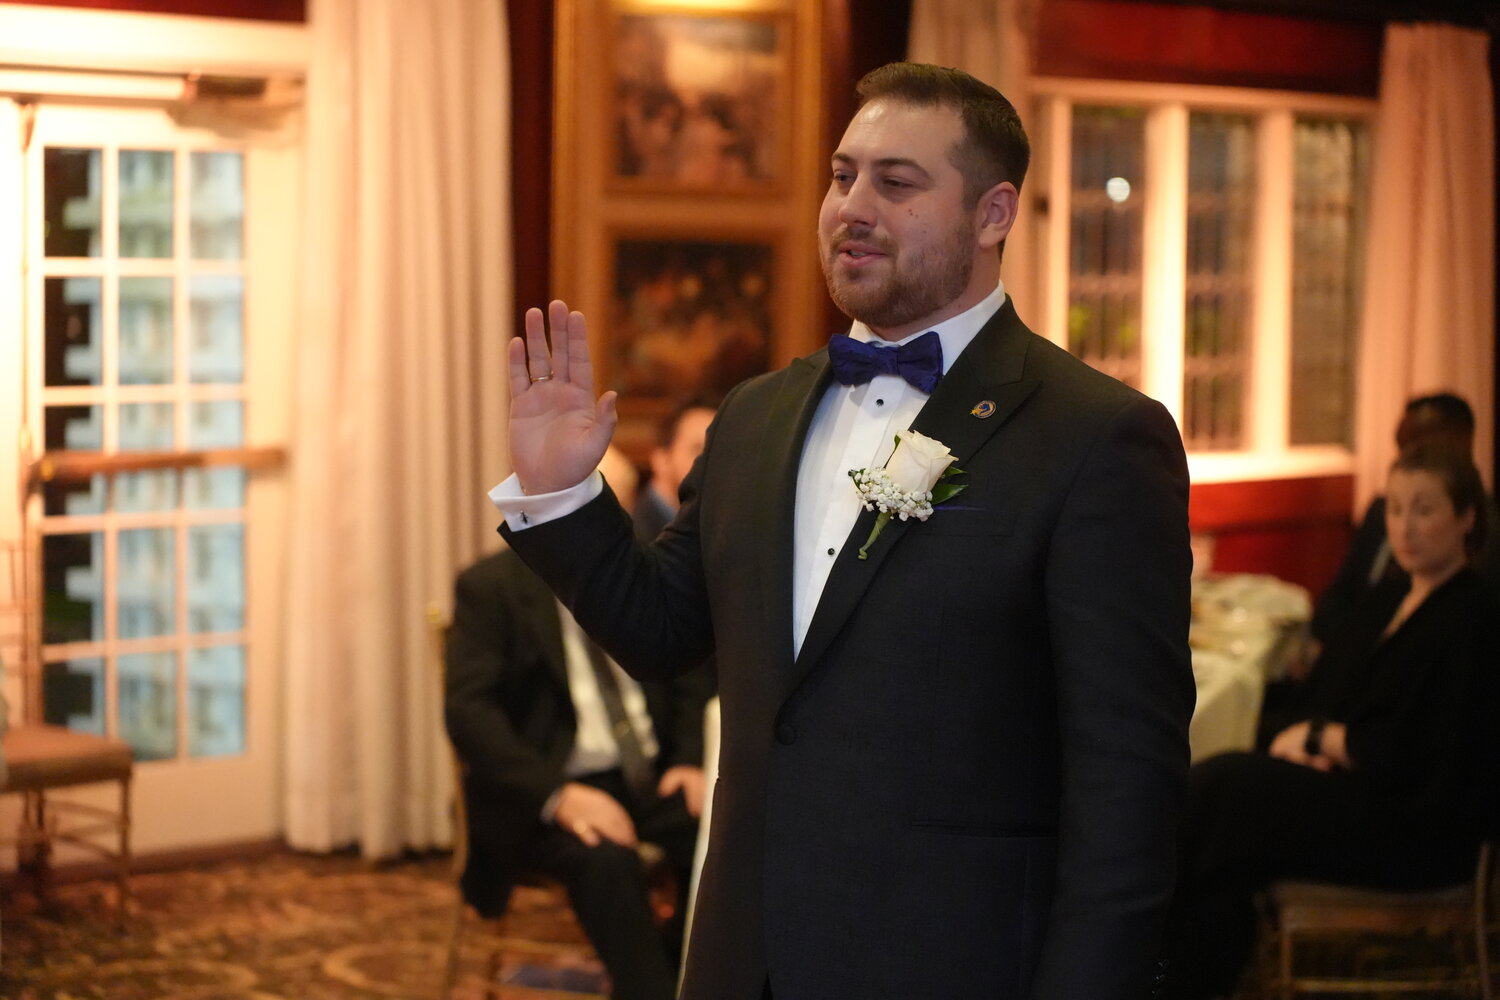 Anthony Bott, of Worth Property Management & Real Estate Brokerage, was sworn in as the chamber’s new president.